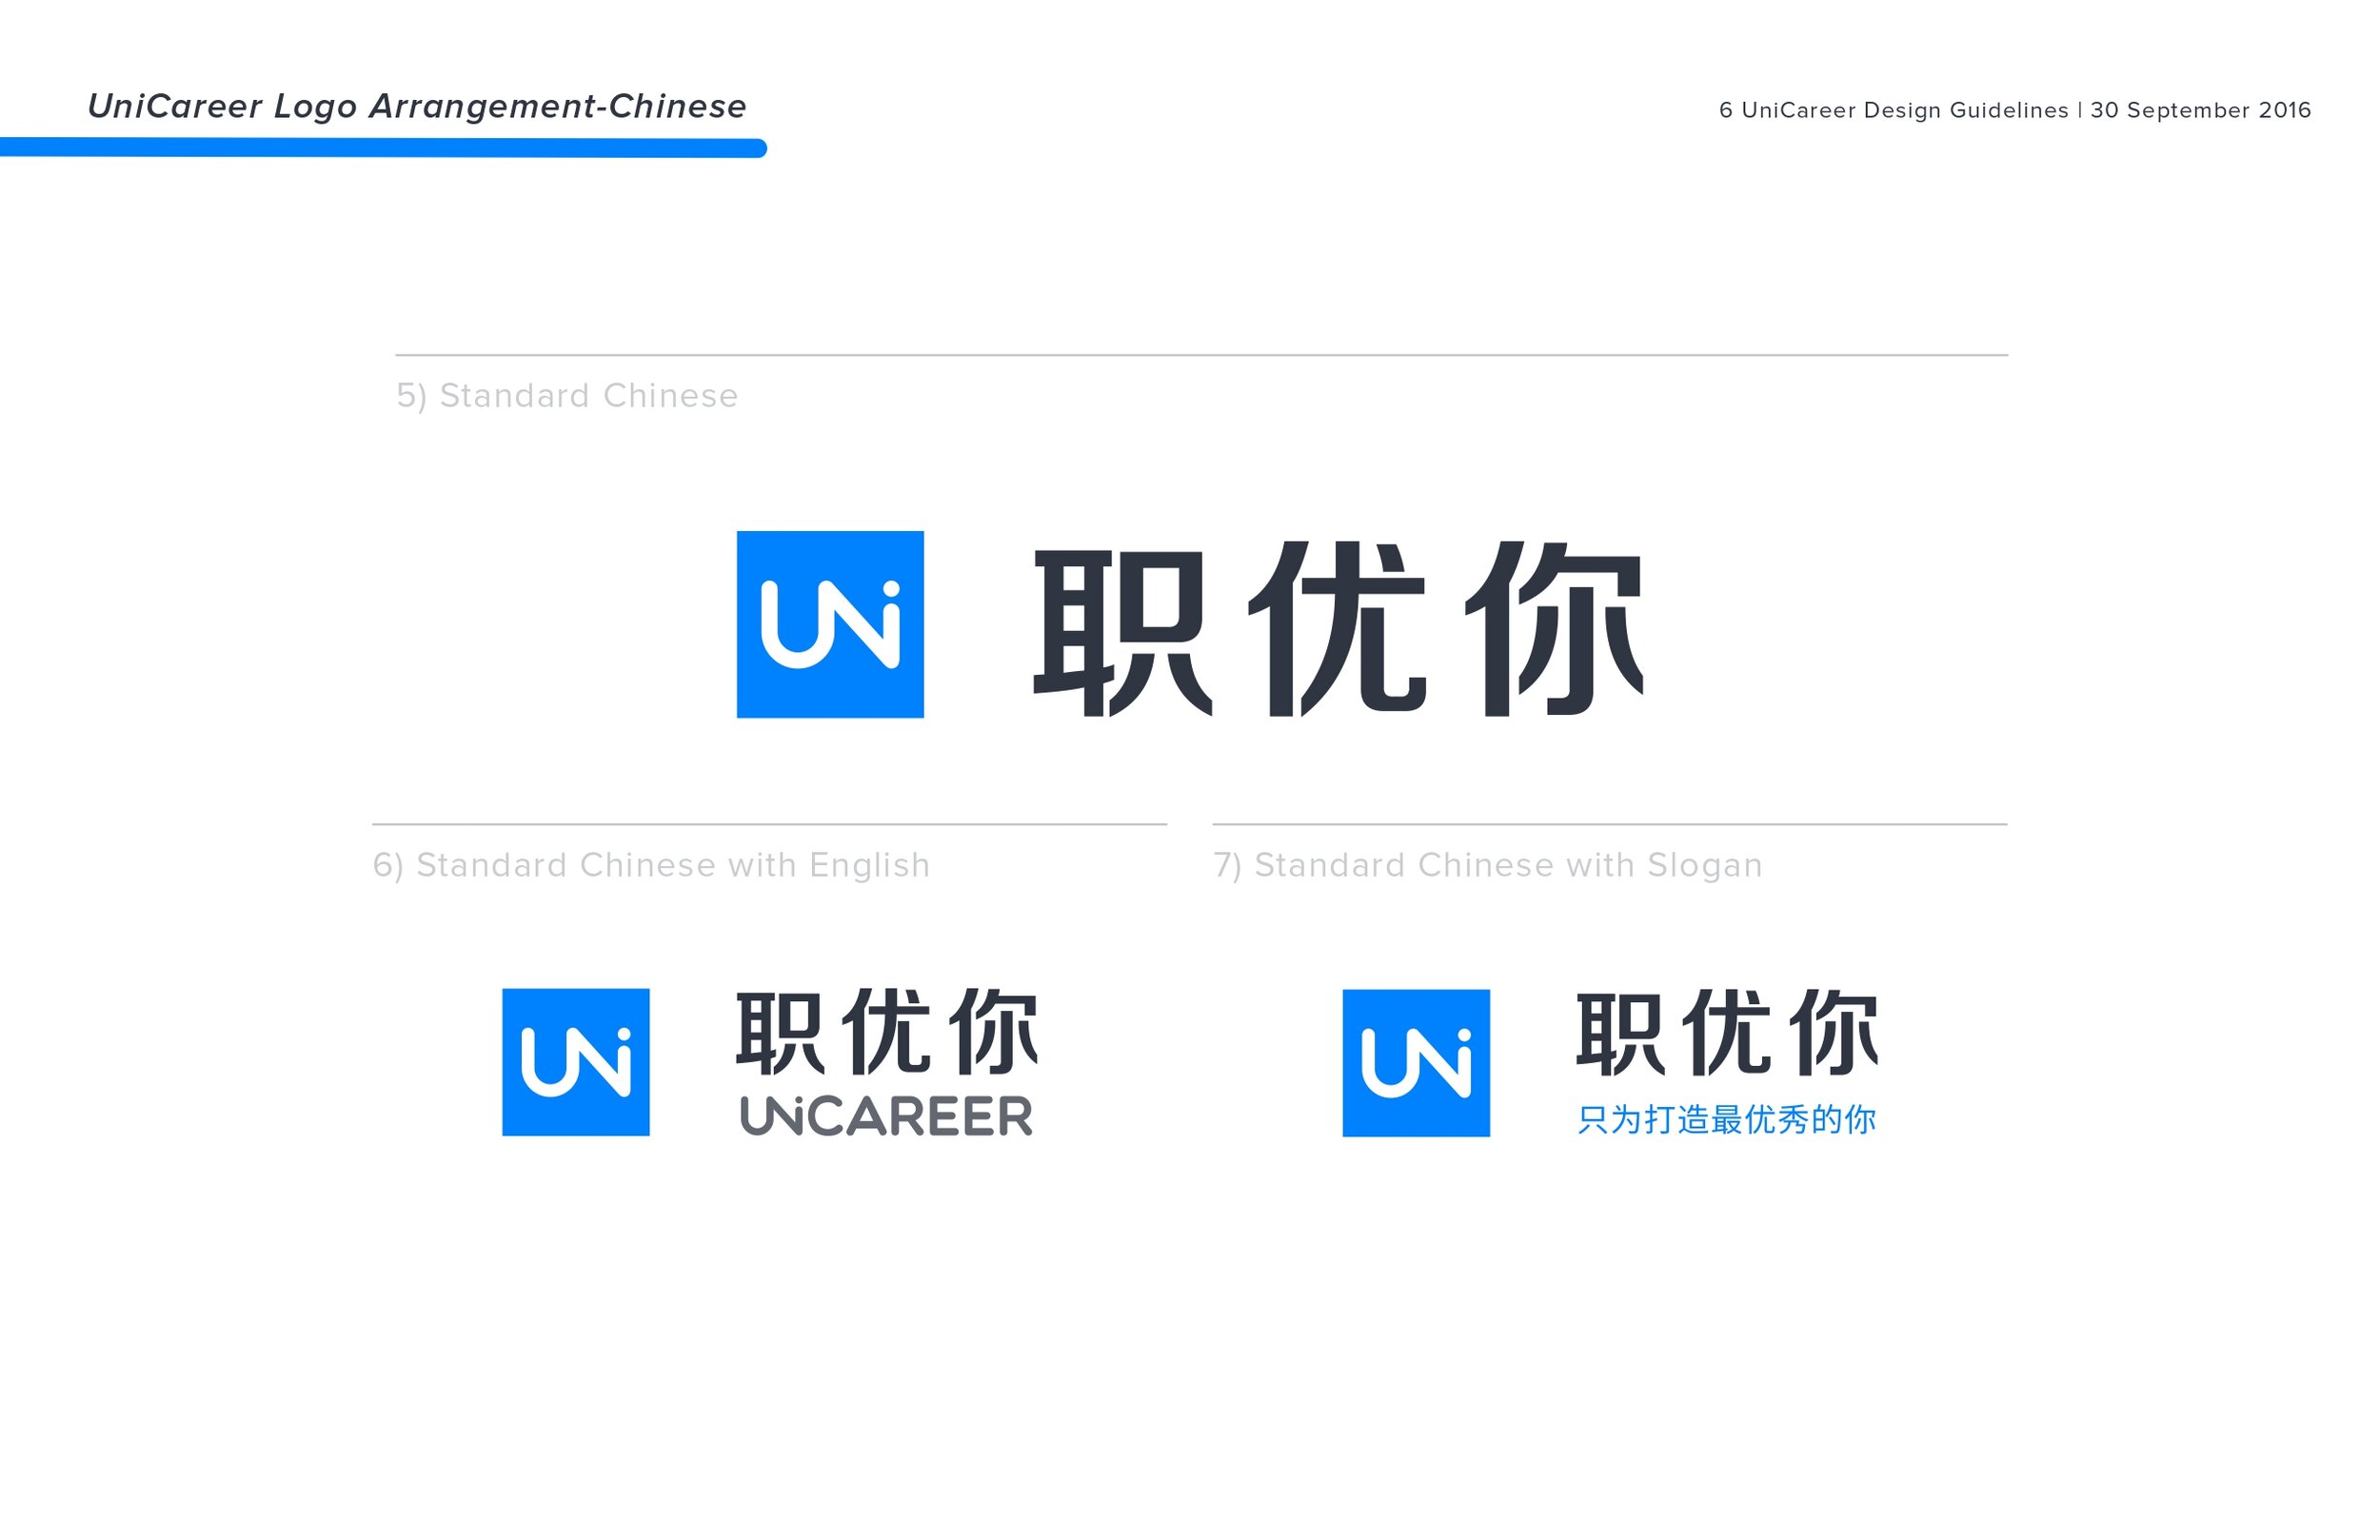 2016 UniCareer Design Guidelines_small_pages-to-jpg-0007.jpg